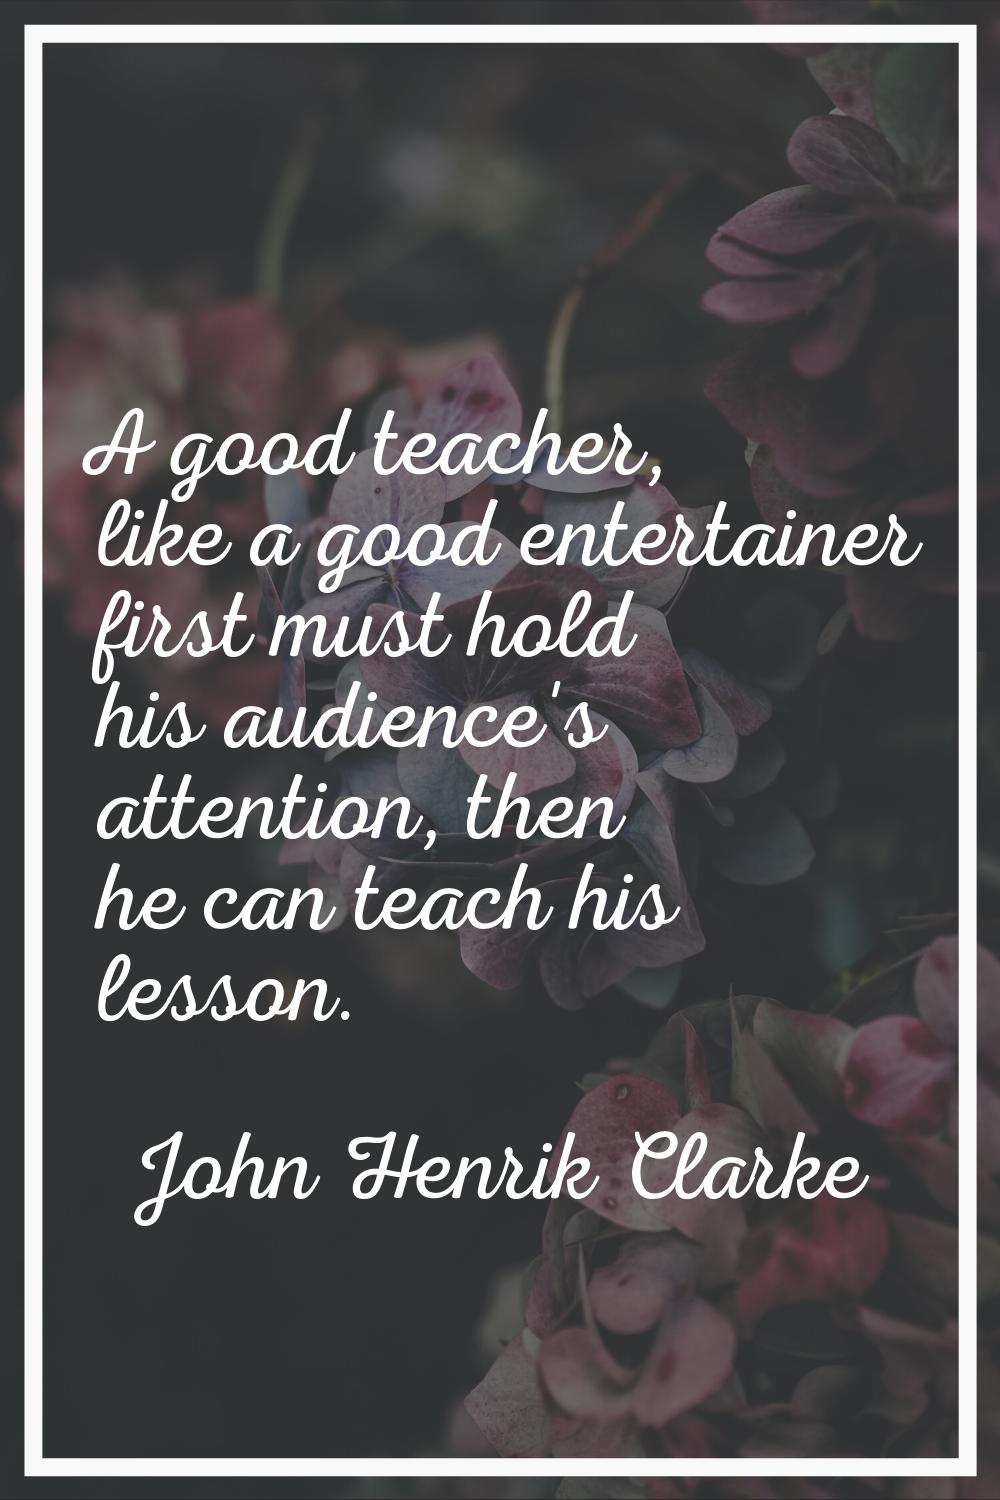 A good teacher, like a good entertainer first must hold his audience's attention, then he can teach